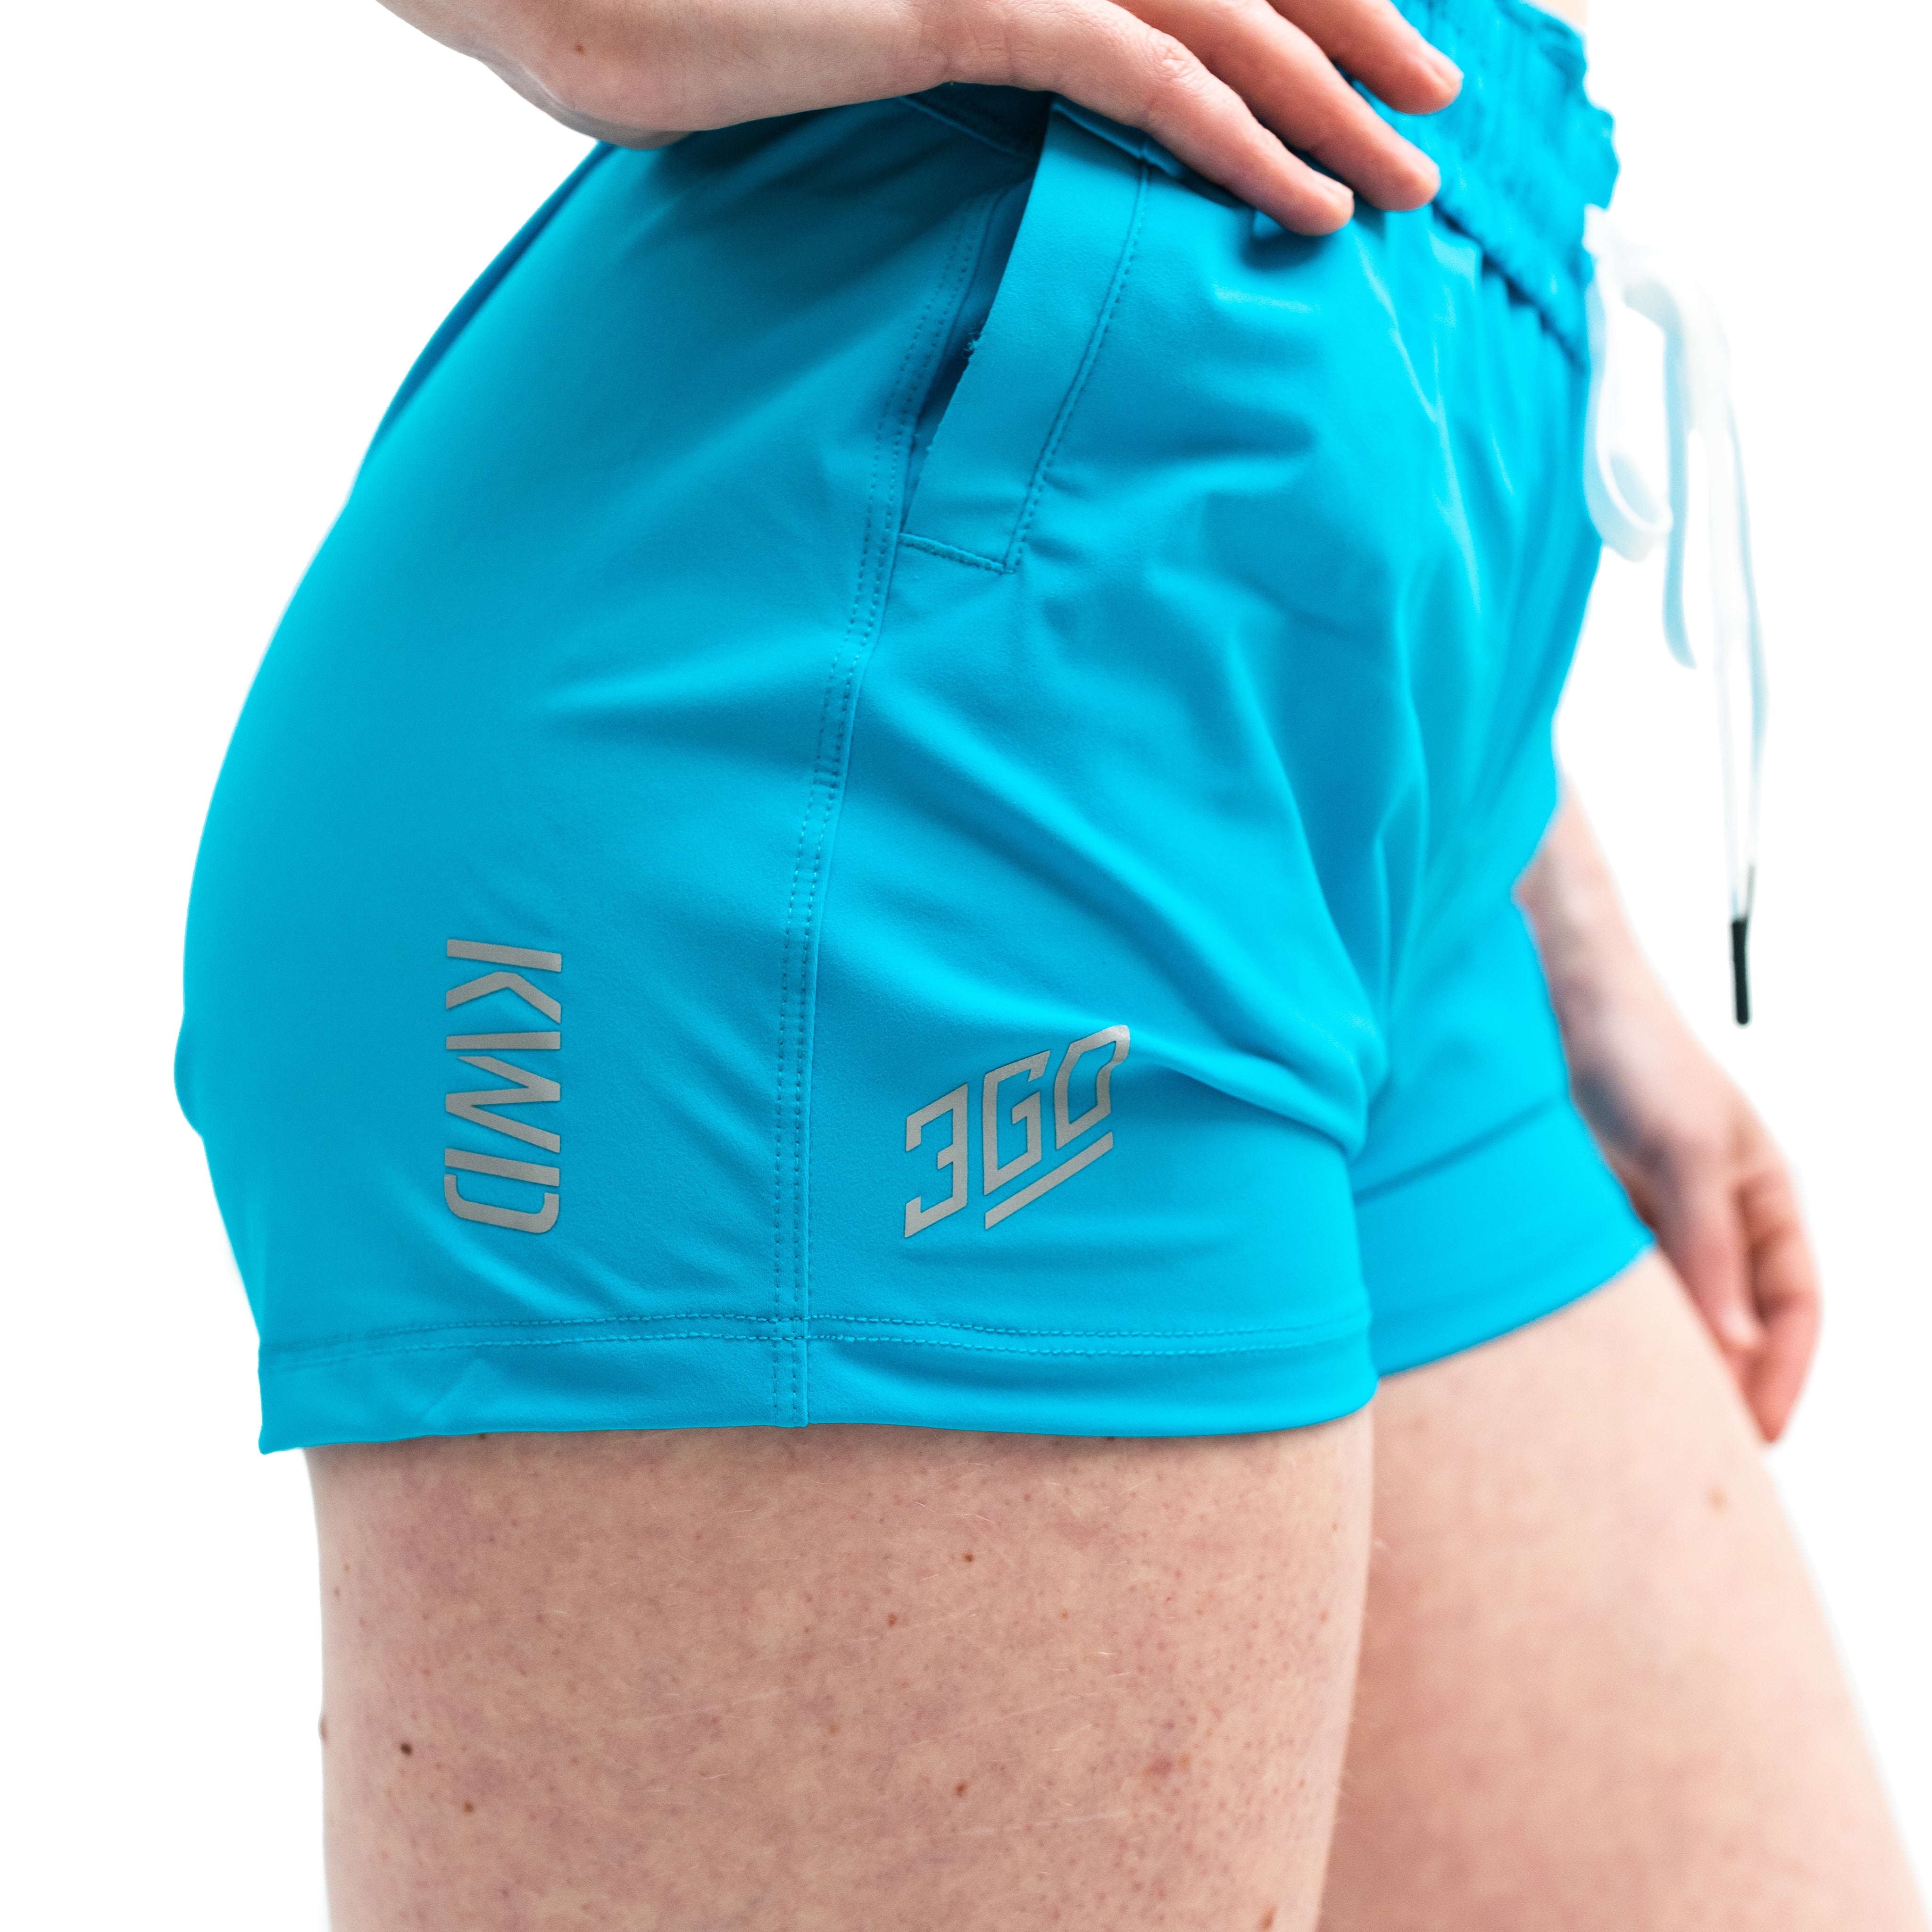 Electric Blue 360-GO KWD shorts were created to provide the flexibility for all the movements in your training while offering the comfort and fit you have come to love through our KWD shorts. Purchase 360-GO KWD shorts from A7 UK and A7 Europe. 360-GO KWD shorts are perfect for powerlifting and weightlifting training. Available in UK and Europe including France, Italy, Germany, the Netherlands, Sweden and Poland.